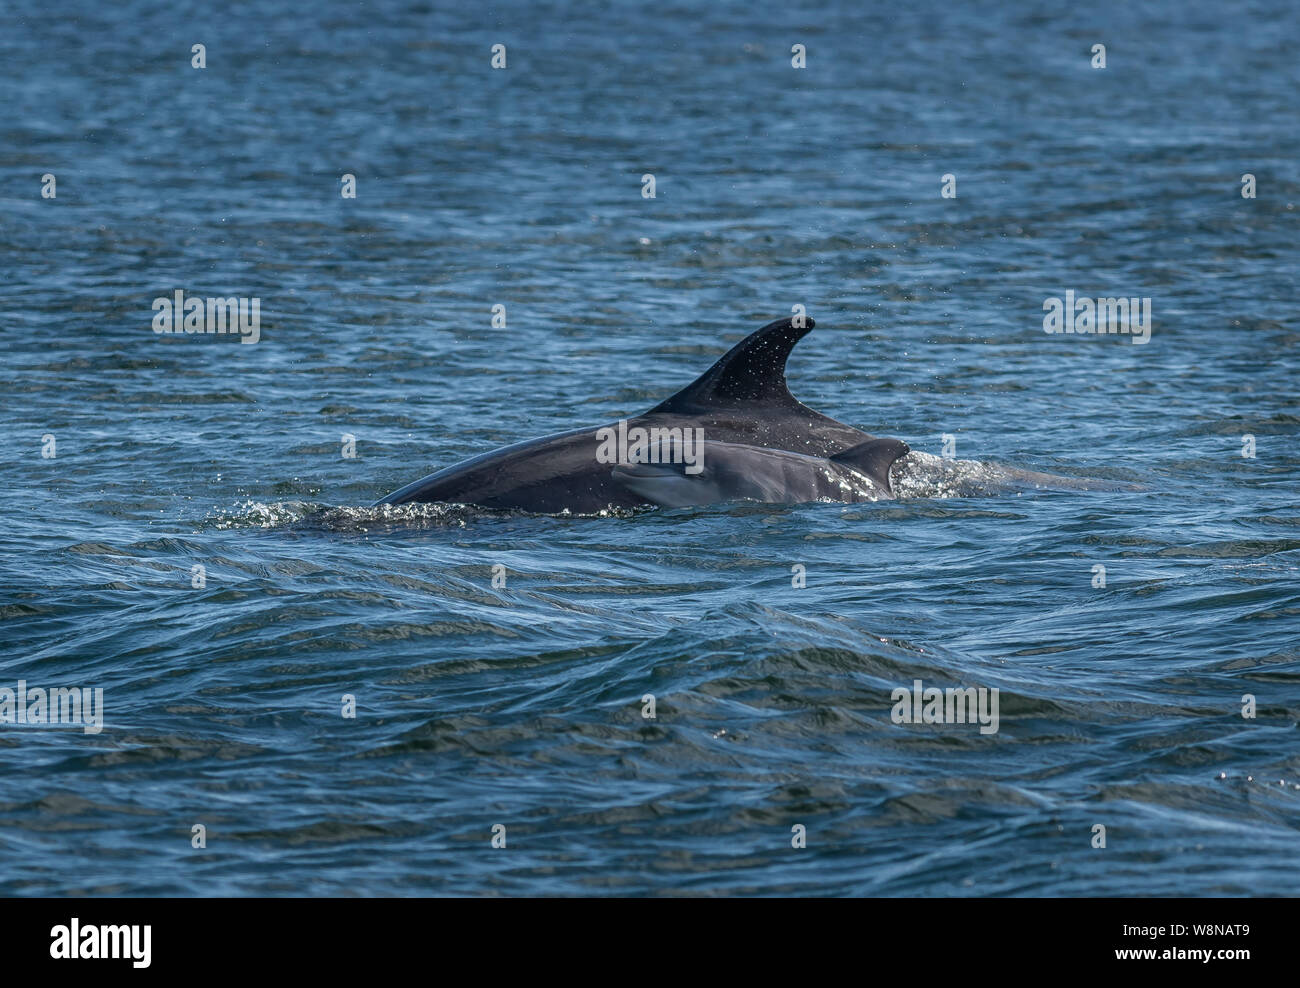 Mother And Newborn Baby Bottlenose Dolphin During A Salmon Hunting Lesson At The Moray Firth Near Inverness In Scotland Stock Photo